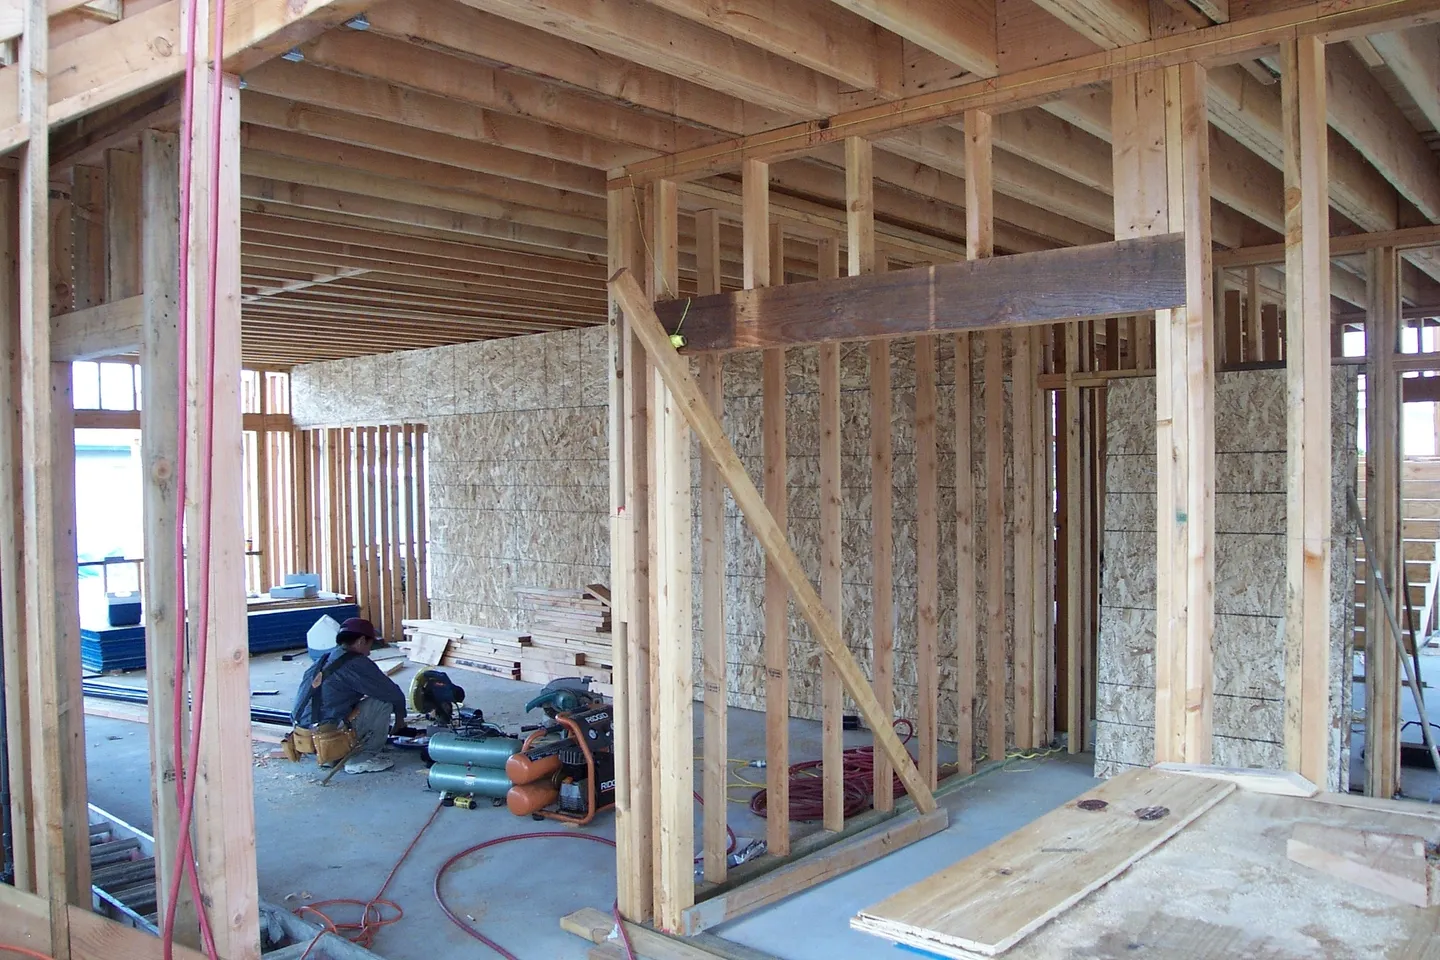 A room being built with wood and concrete